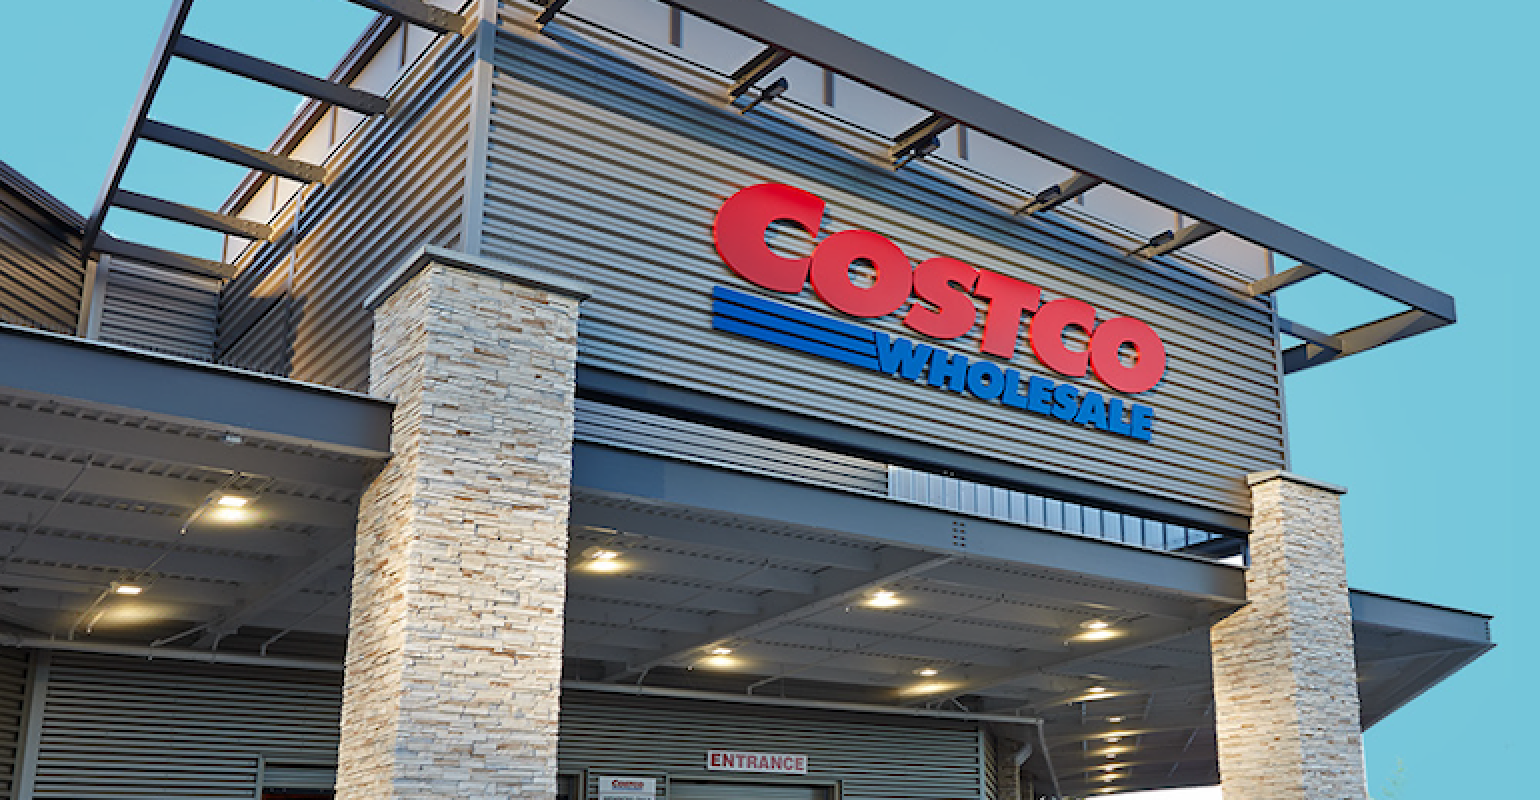 Costco sales increase, but forecast missed Supermarket News